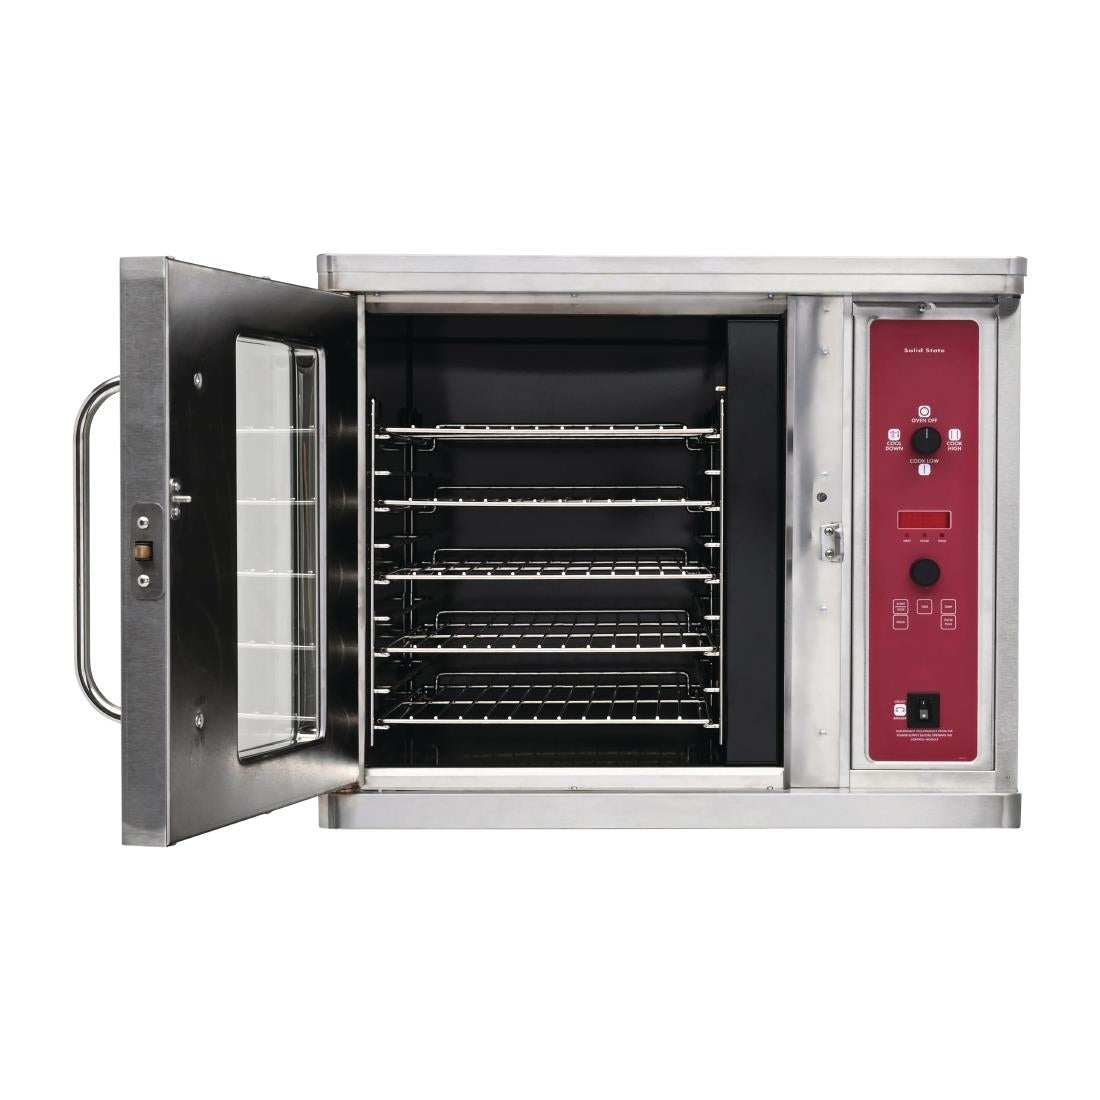 FP874 Blodgett Half Size Convection Oven CTB-1 JD Catering Equipment Solutions Ltd